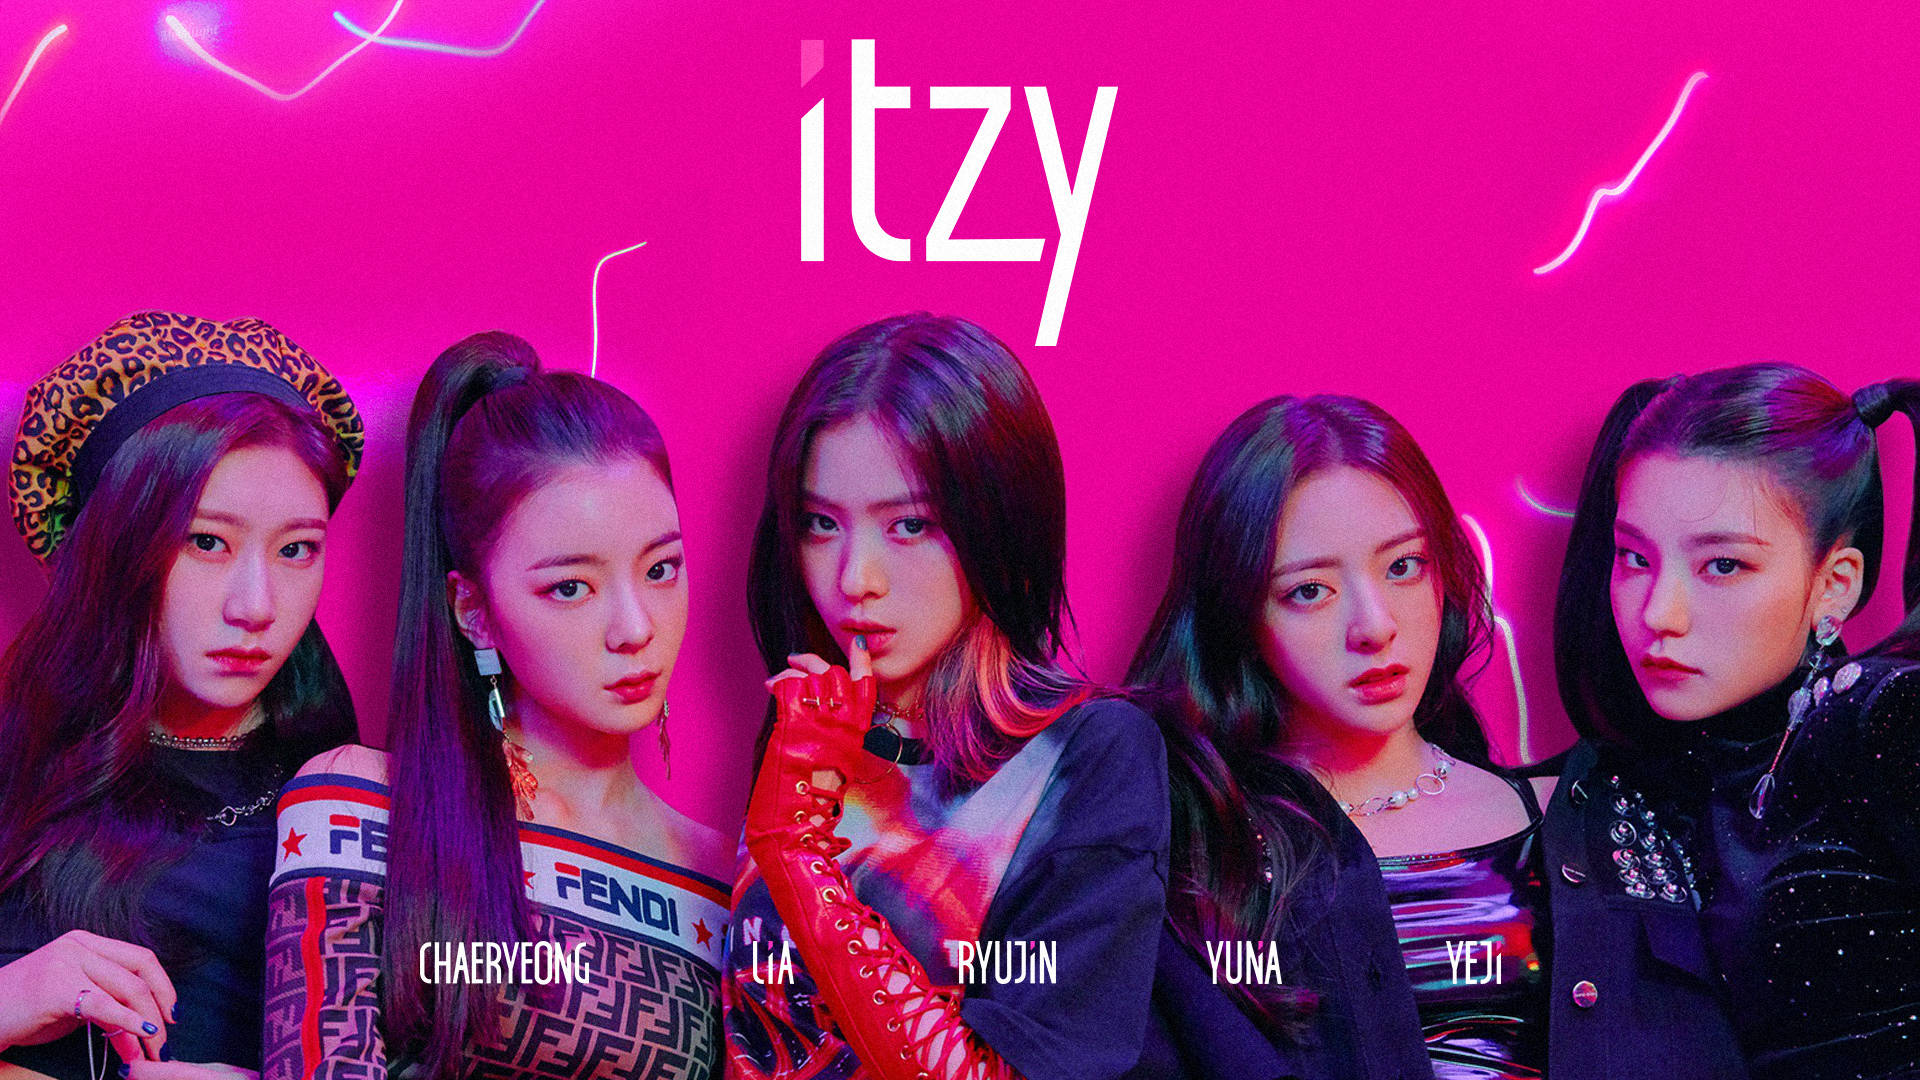 Itzy Debut Poster